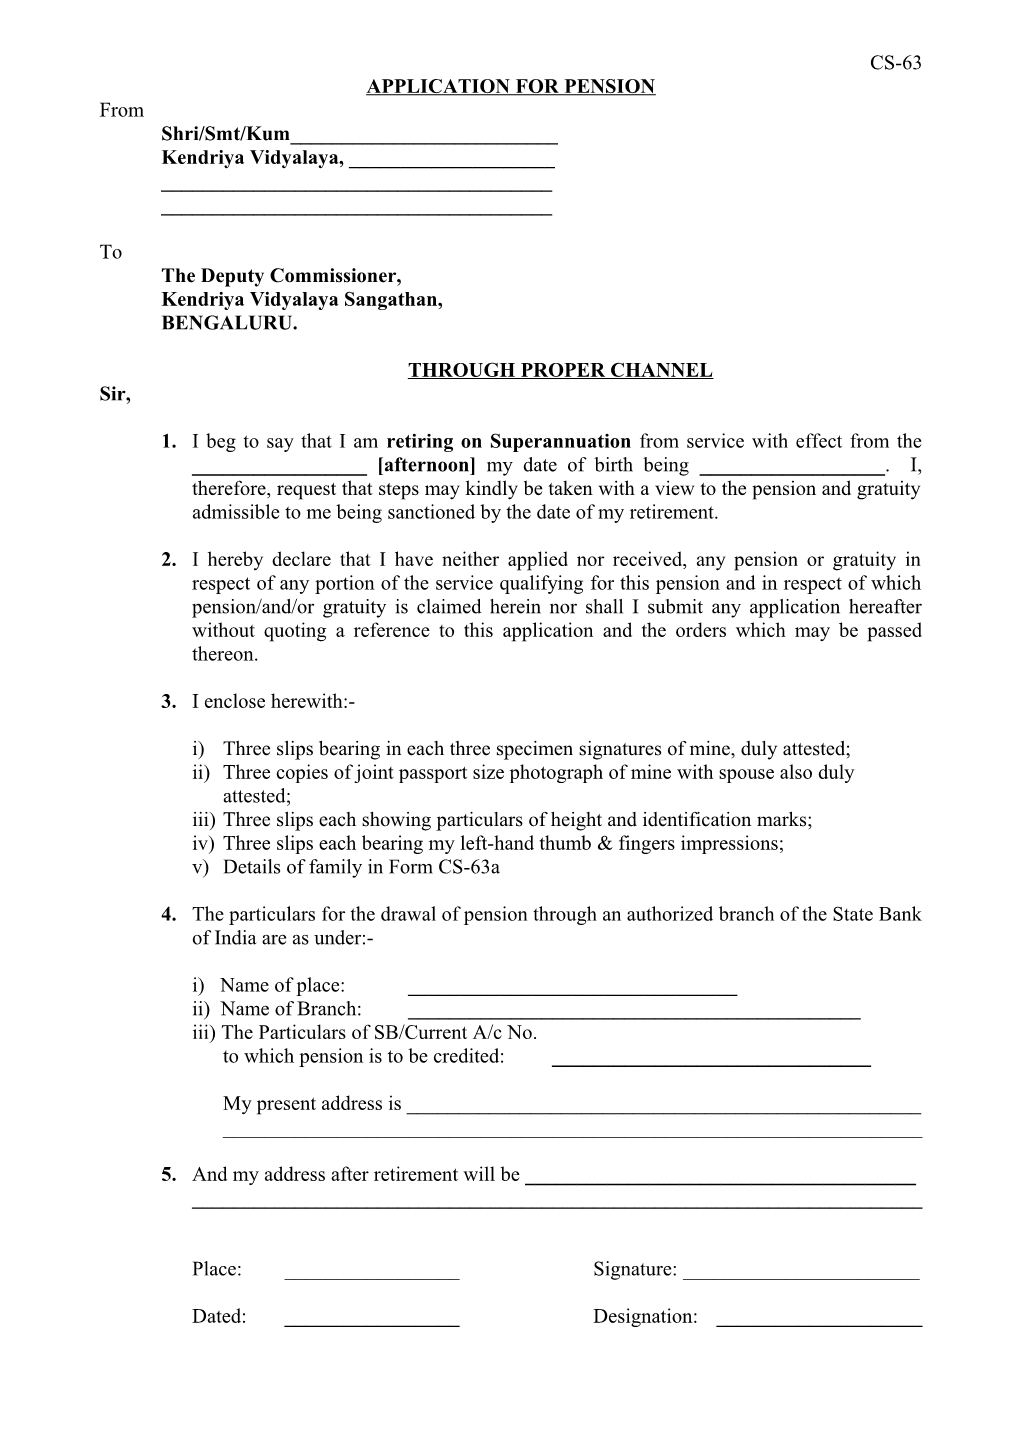 Application for Pension